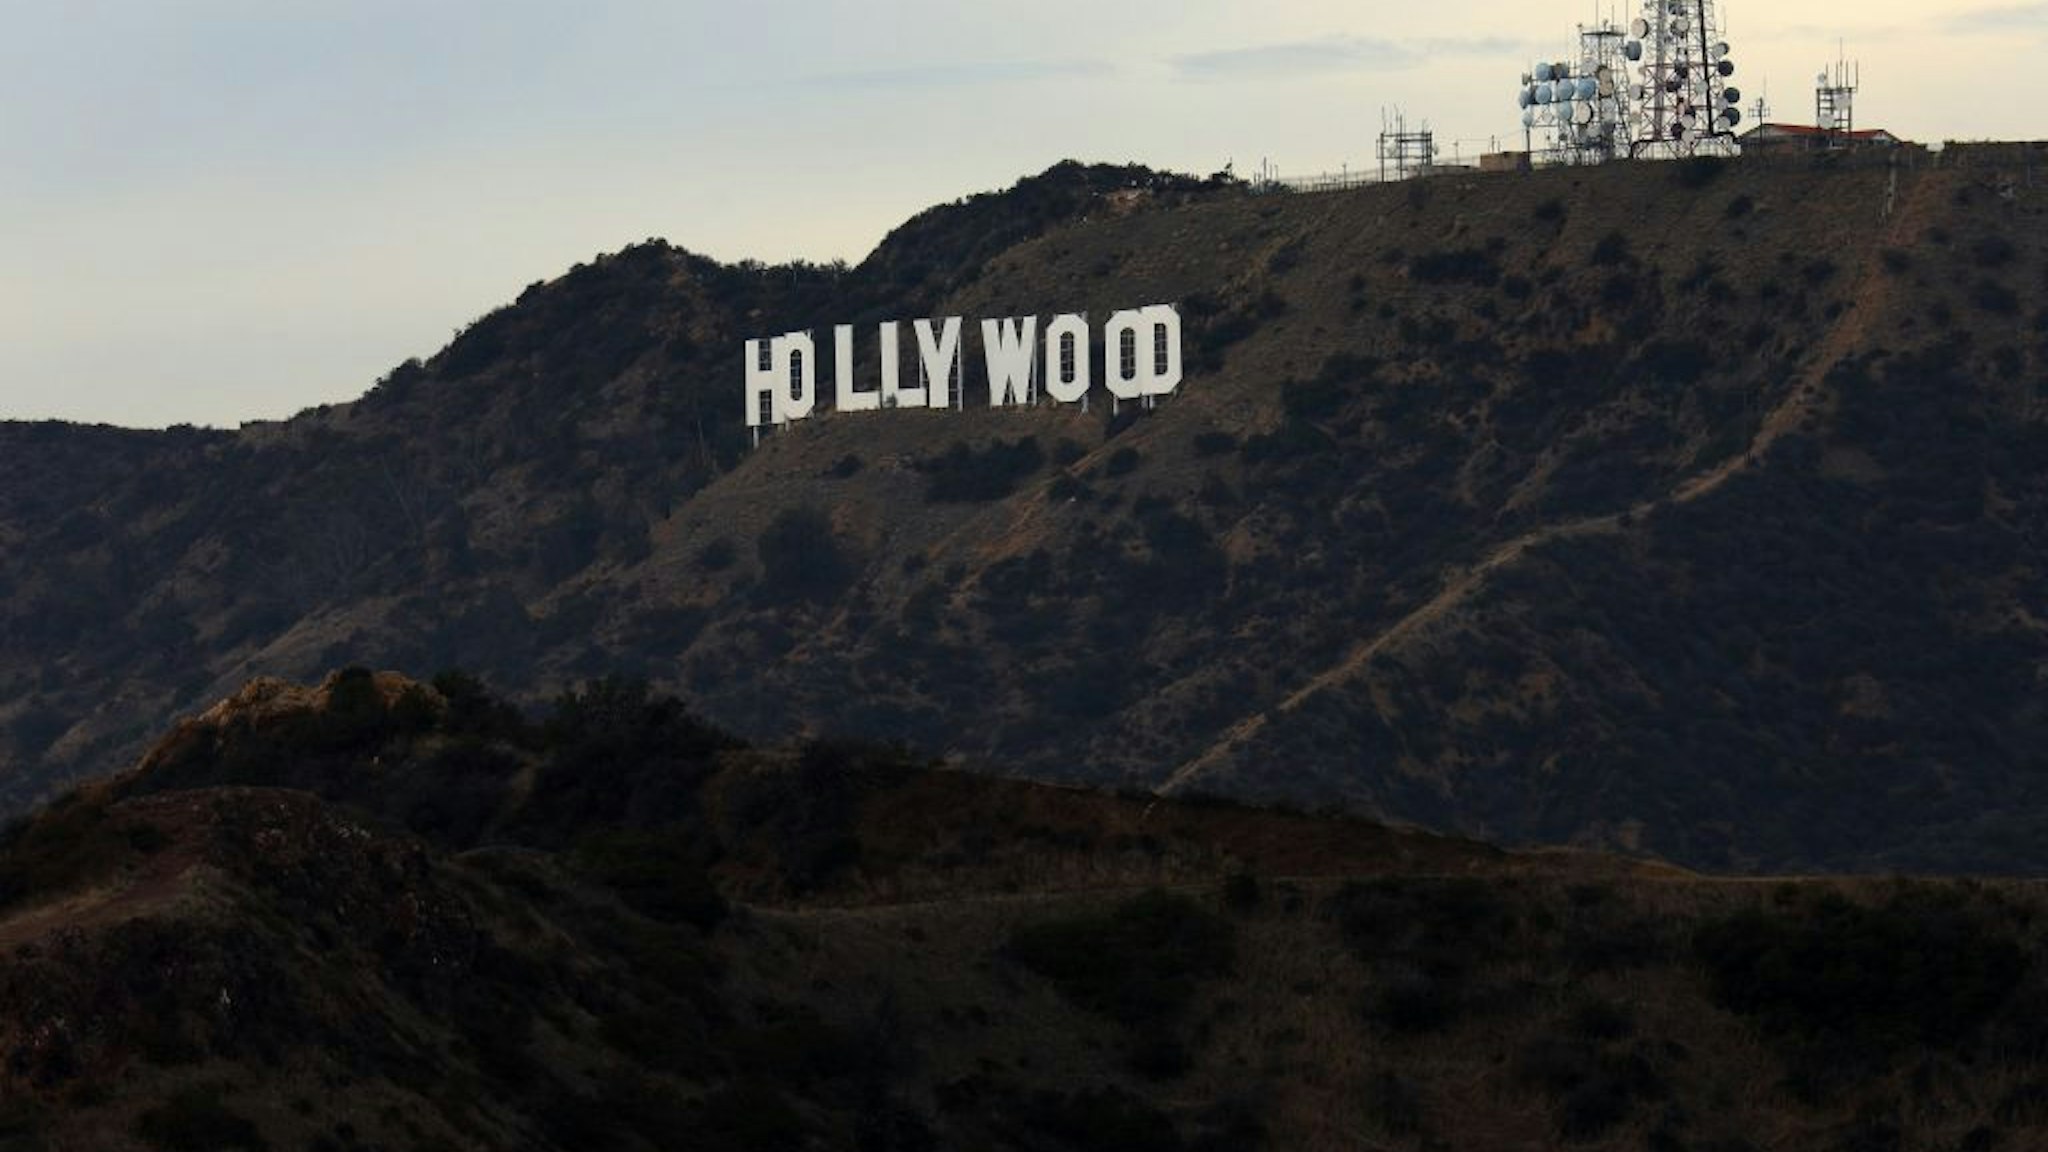 homas Fisk Goff's famous 'Hollywood Sign' atop Mount Lee in the Hollywood Hills area of the Santa Monica Mountains photographed from the Griffith Observatory in Los Angeles, California on January 15, 2018.